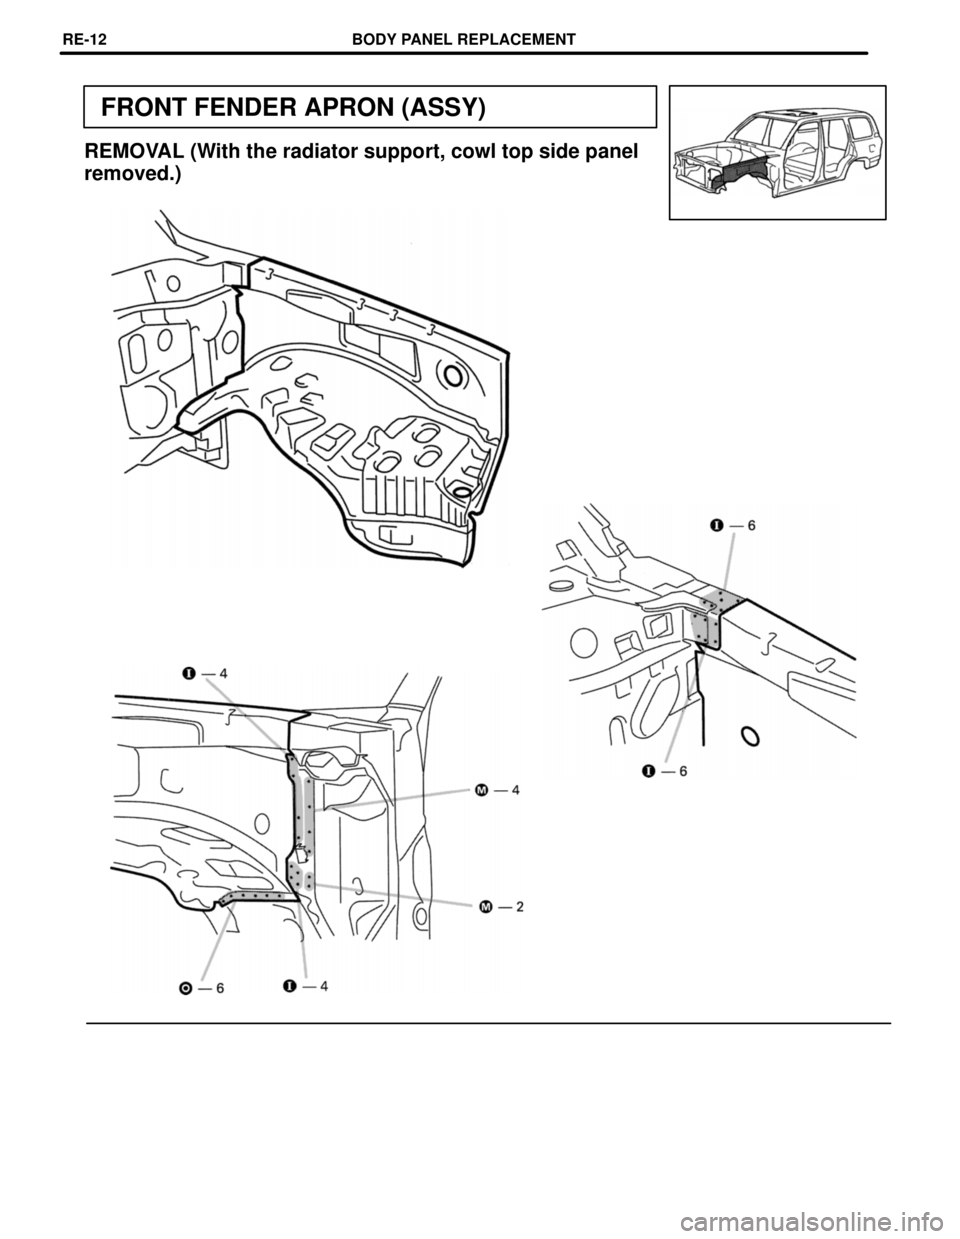 TOYOTA LAND CRUISER 1986  Factory Owners Manual FRONT FENDER APRON (ASSY)
REMOVAL (With the radiator support, cowl top side panel
removed.)
BODY PANEL REPLACEMENTRE-12 